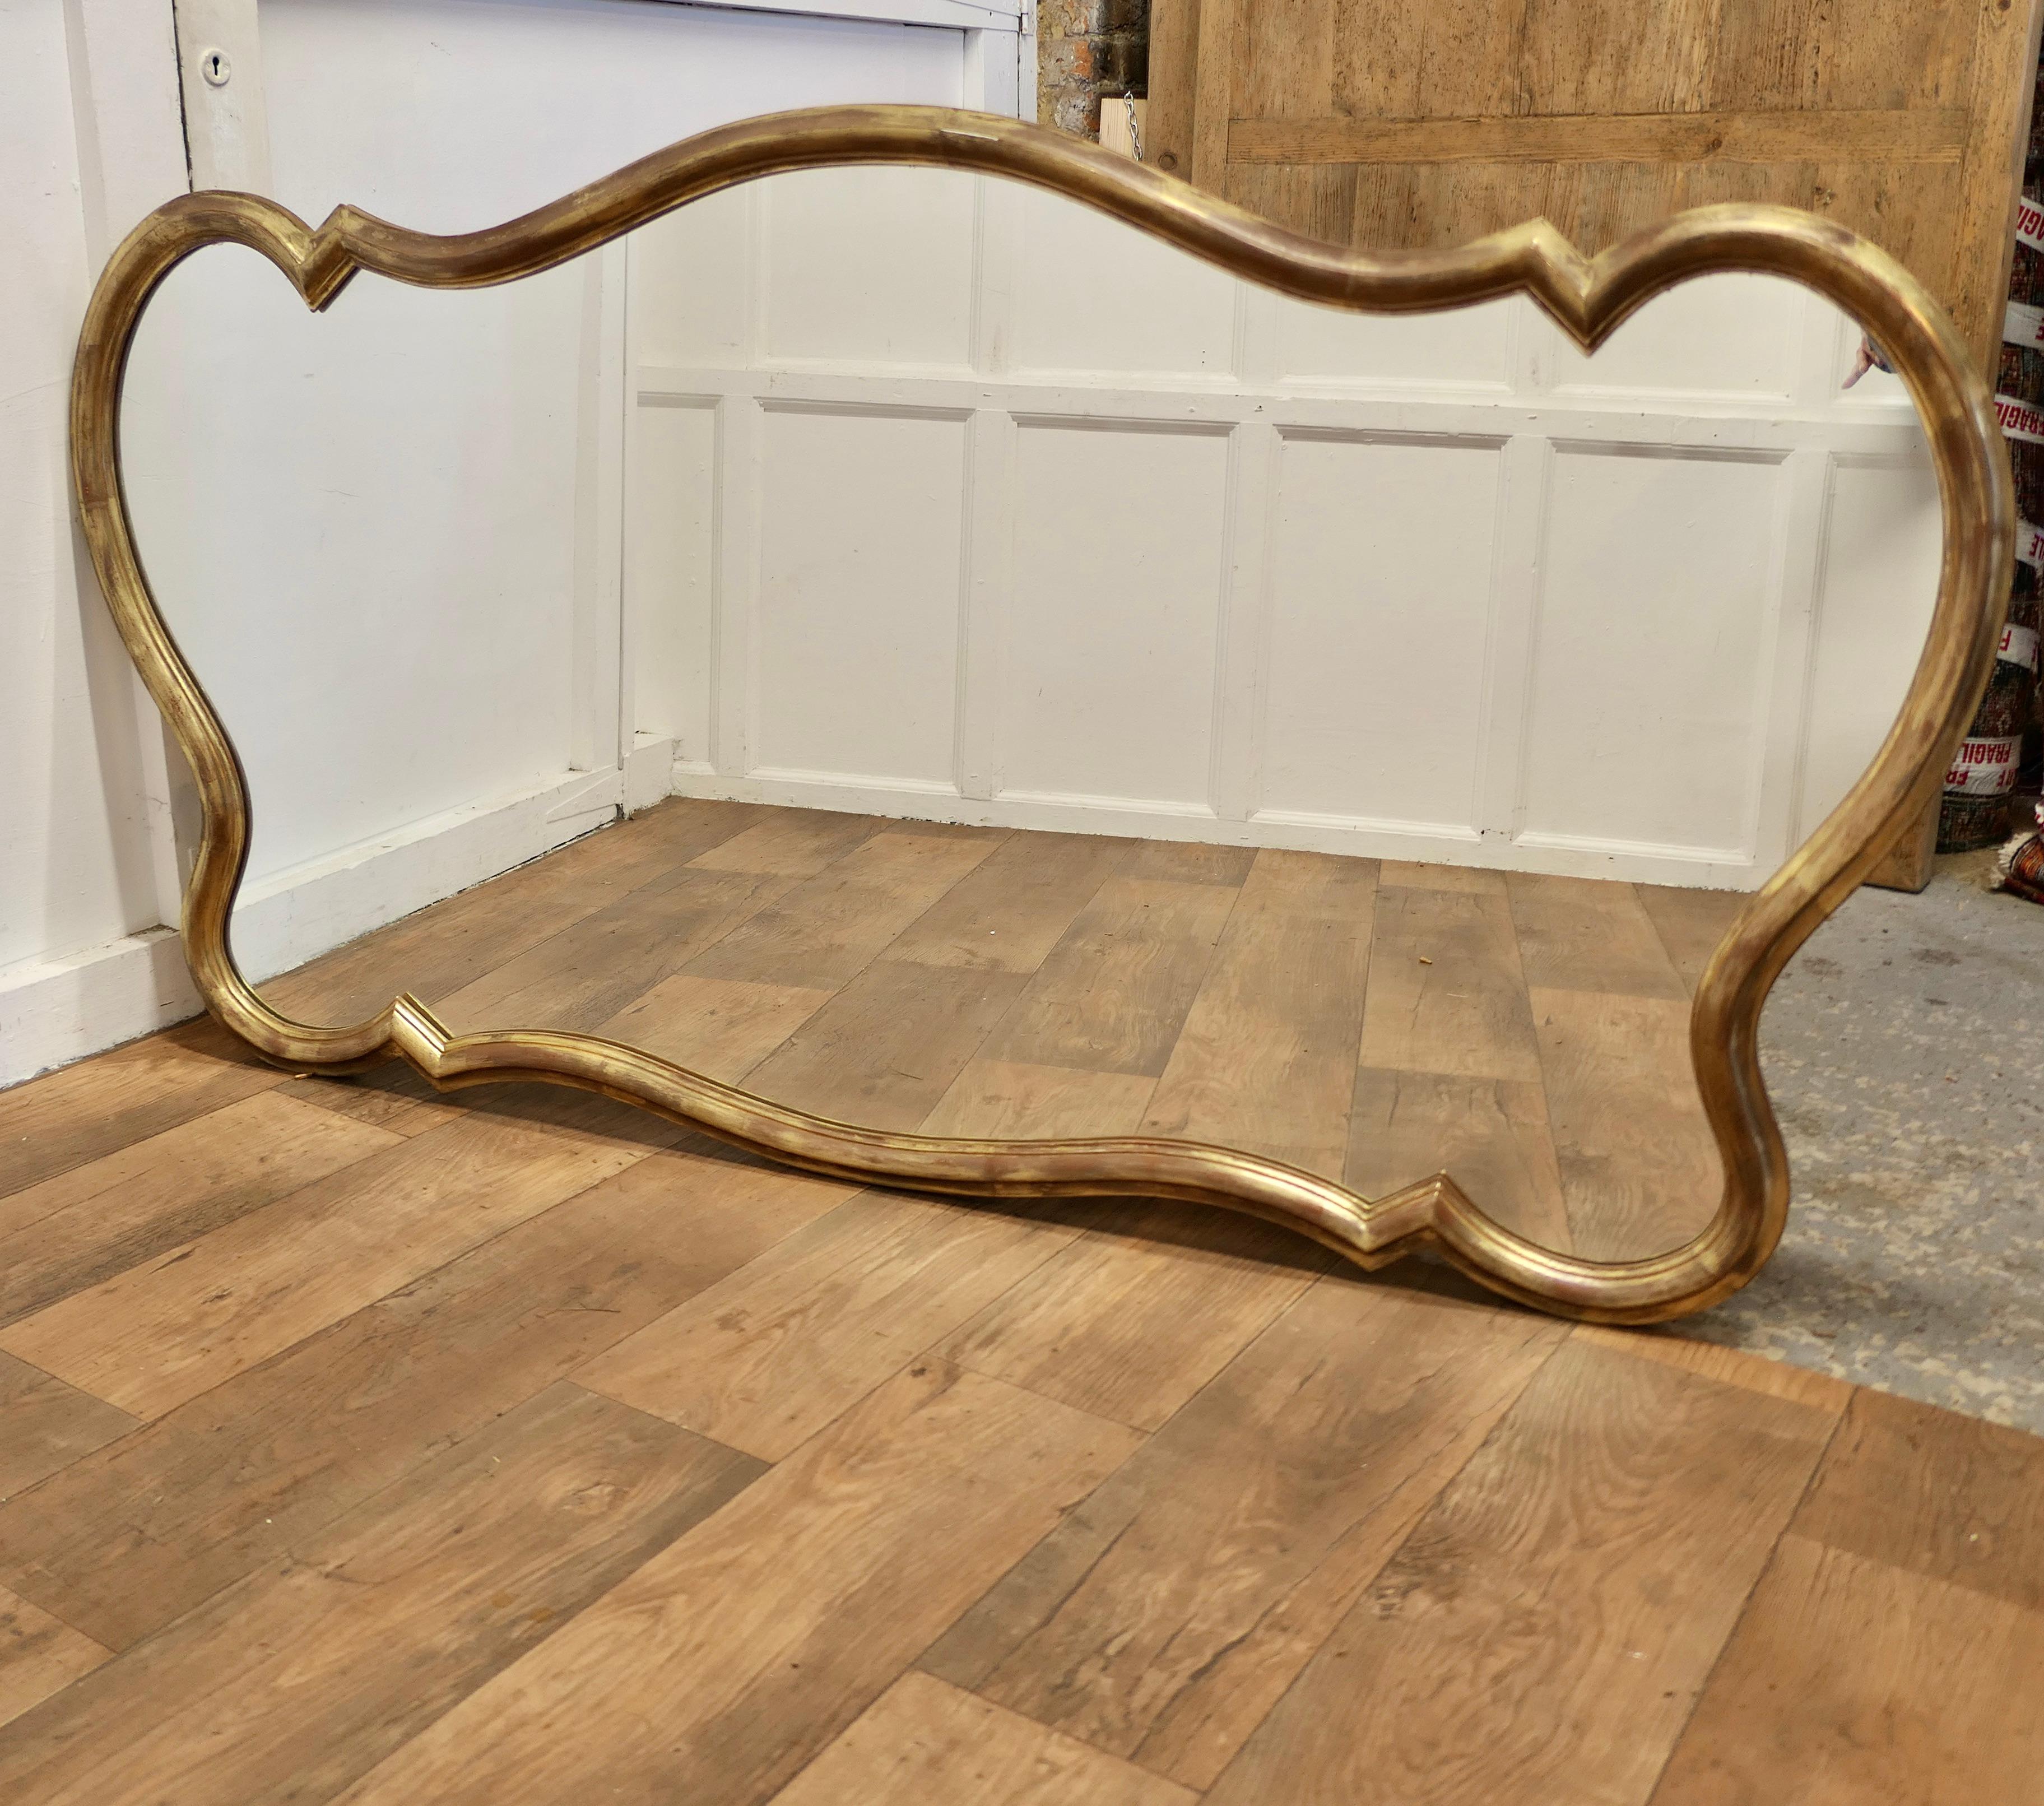 A Superb Very Large Italian Gilt Scallop Shaped Mirror

This is a very Striking piece it has a superb scrolling shape with lots of curves and rounded corners 
The mirror is a lovely aged rich gold colour and would set off the decoration of any room